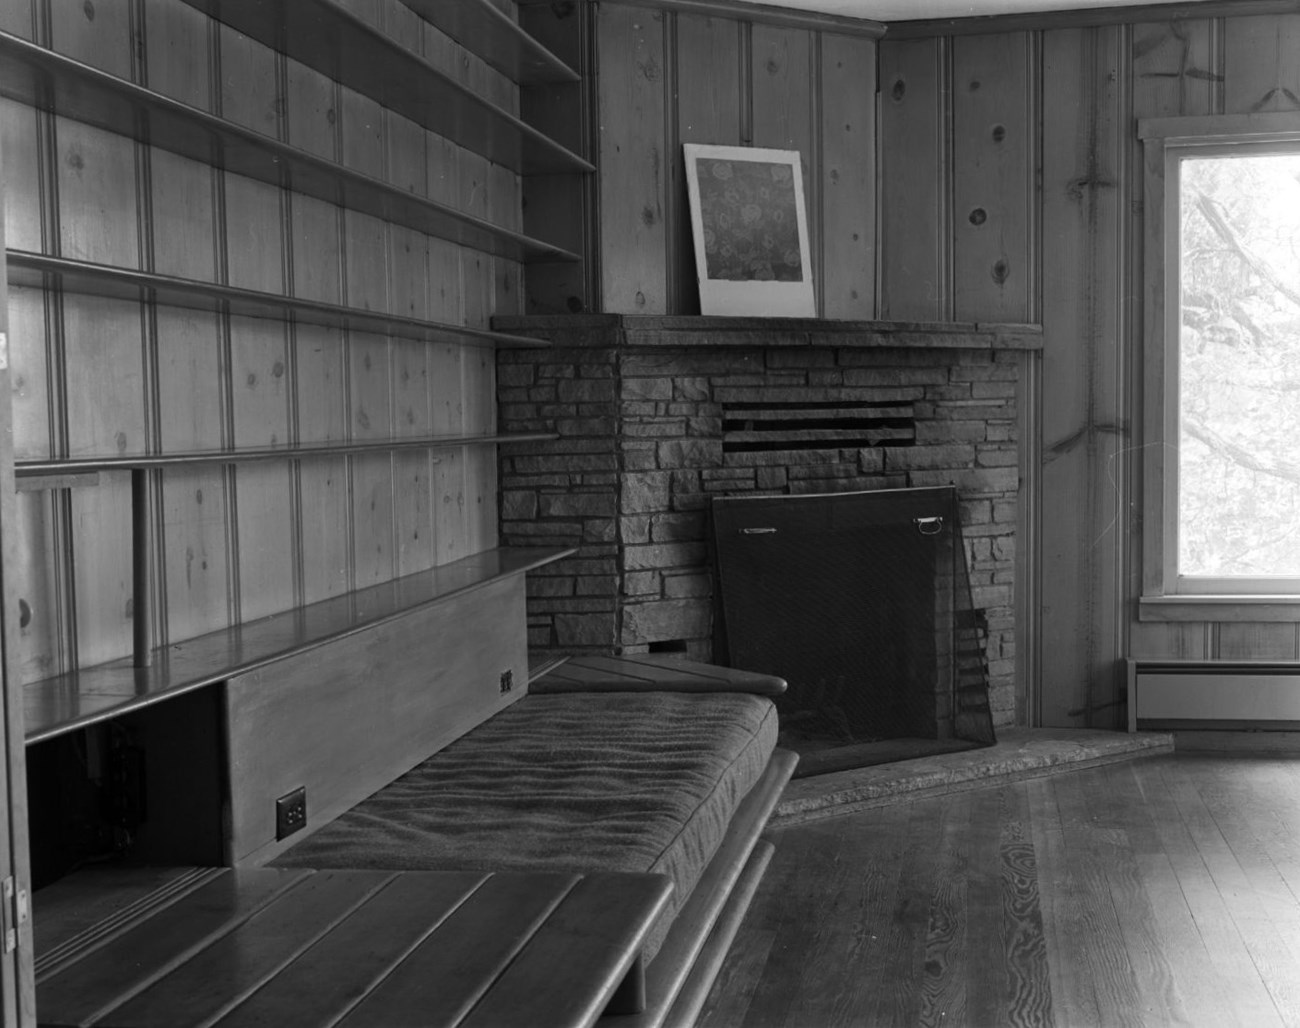 Living room with stone hearth. Wood paneling covers walls, low bench abuts bookshelves on left of fireplace and window to its right looks out into forest.